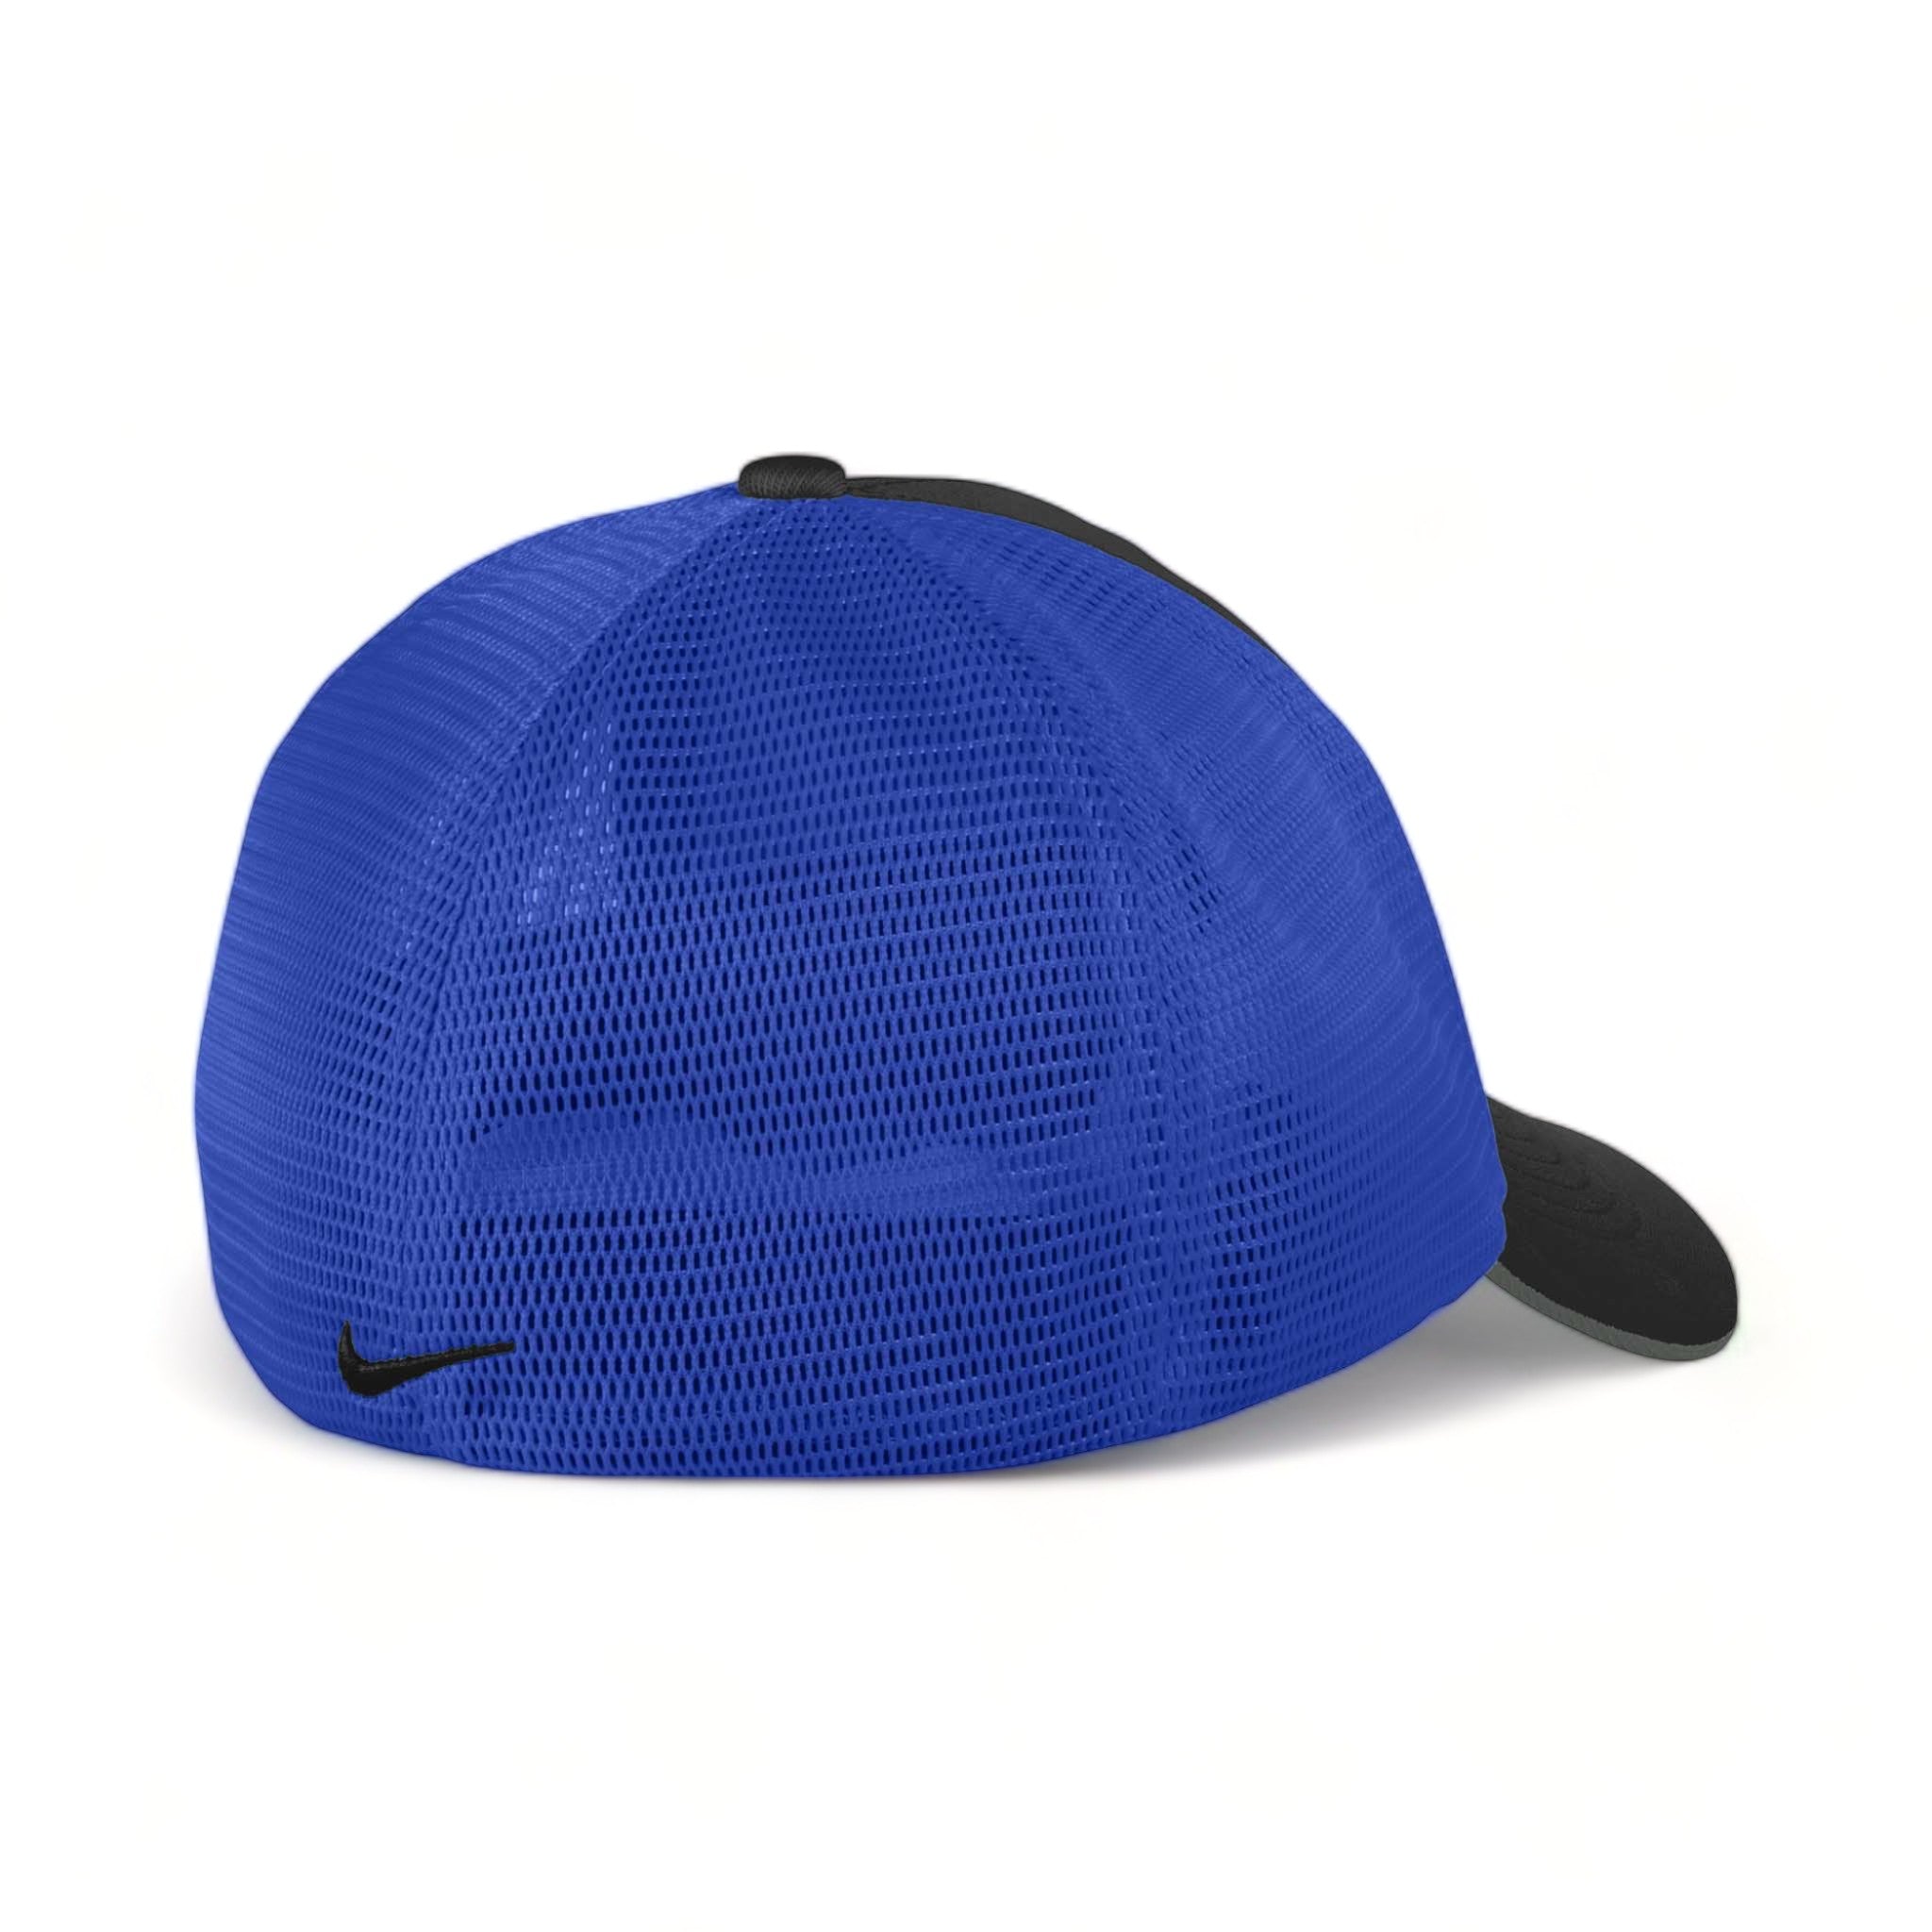 Back view of Nike NKFB6448 custom hat in black and game royal